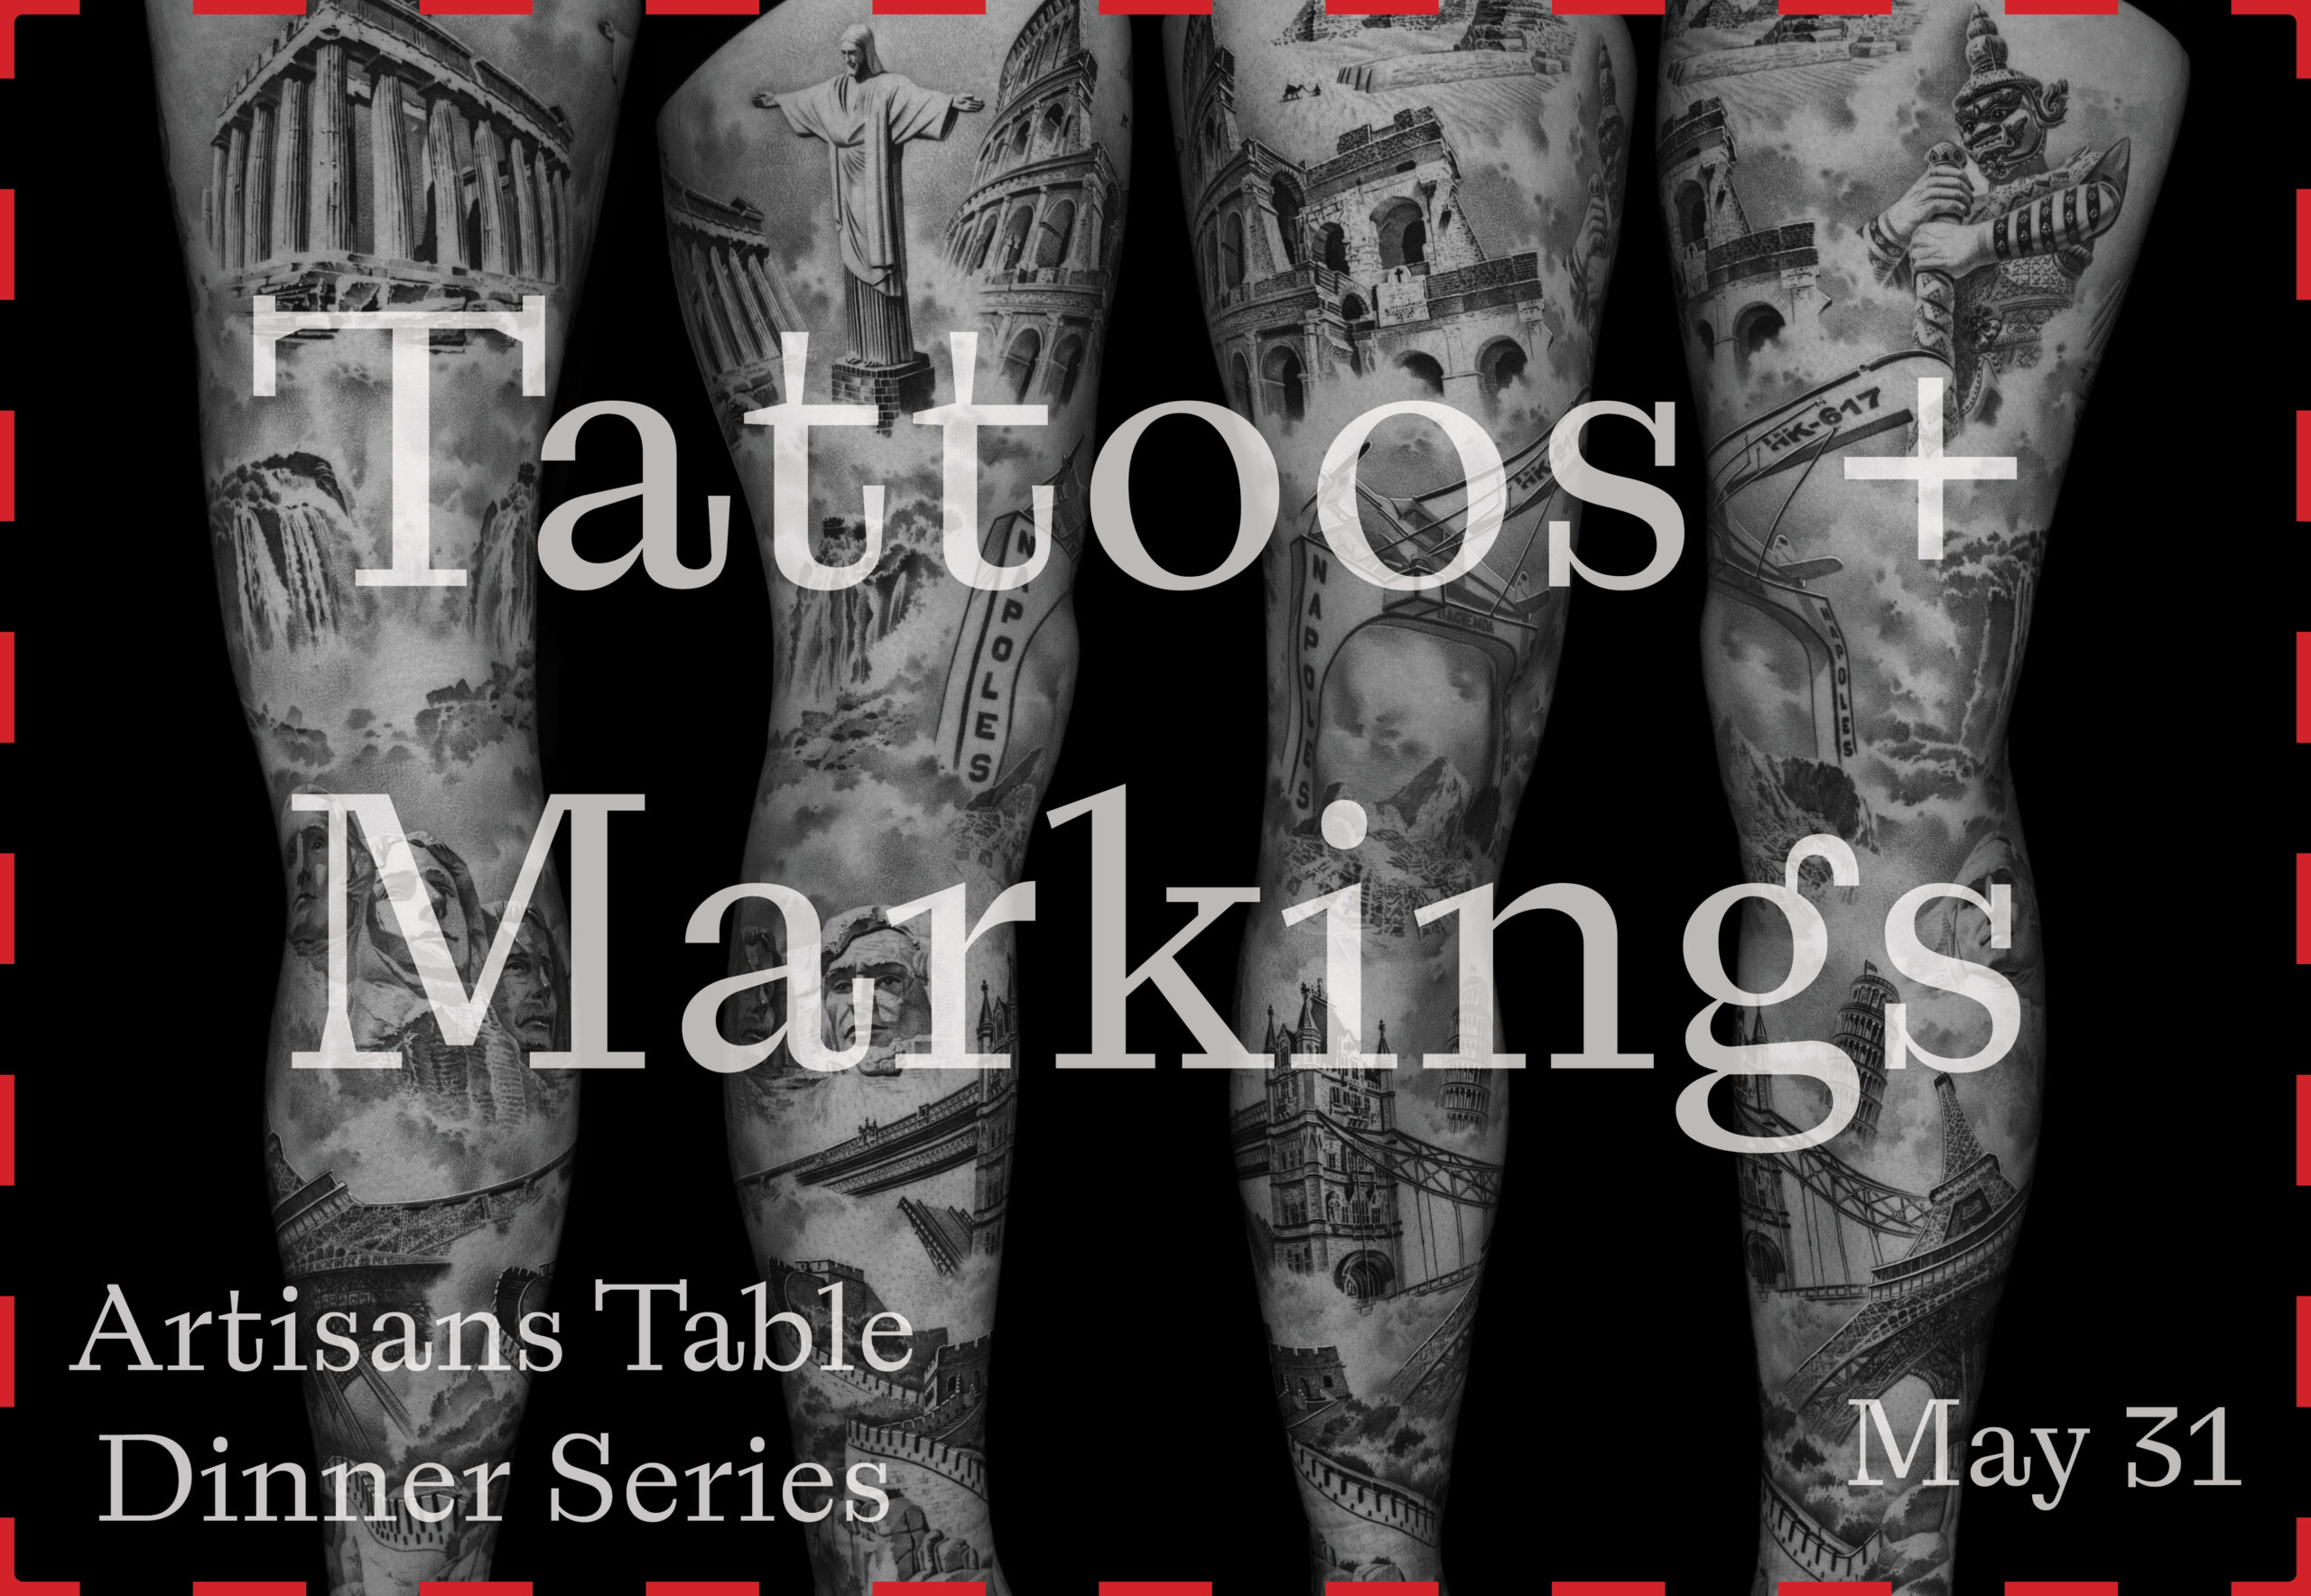 Image of Artisans Table Dinner: Tattoos and Markings